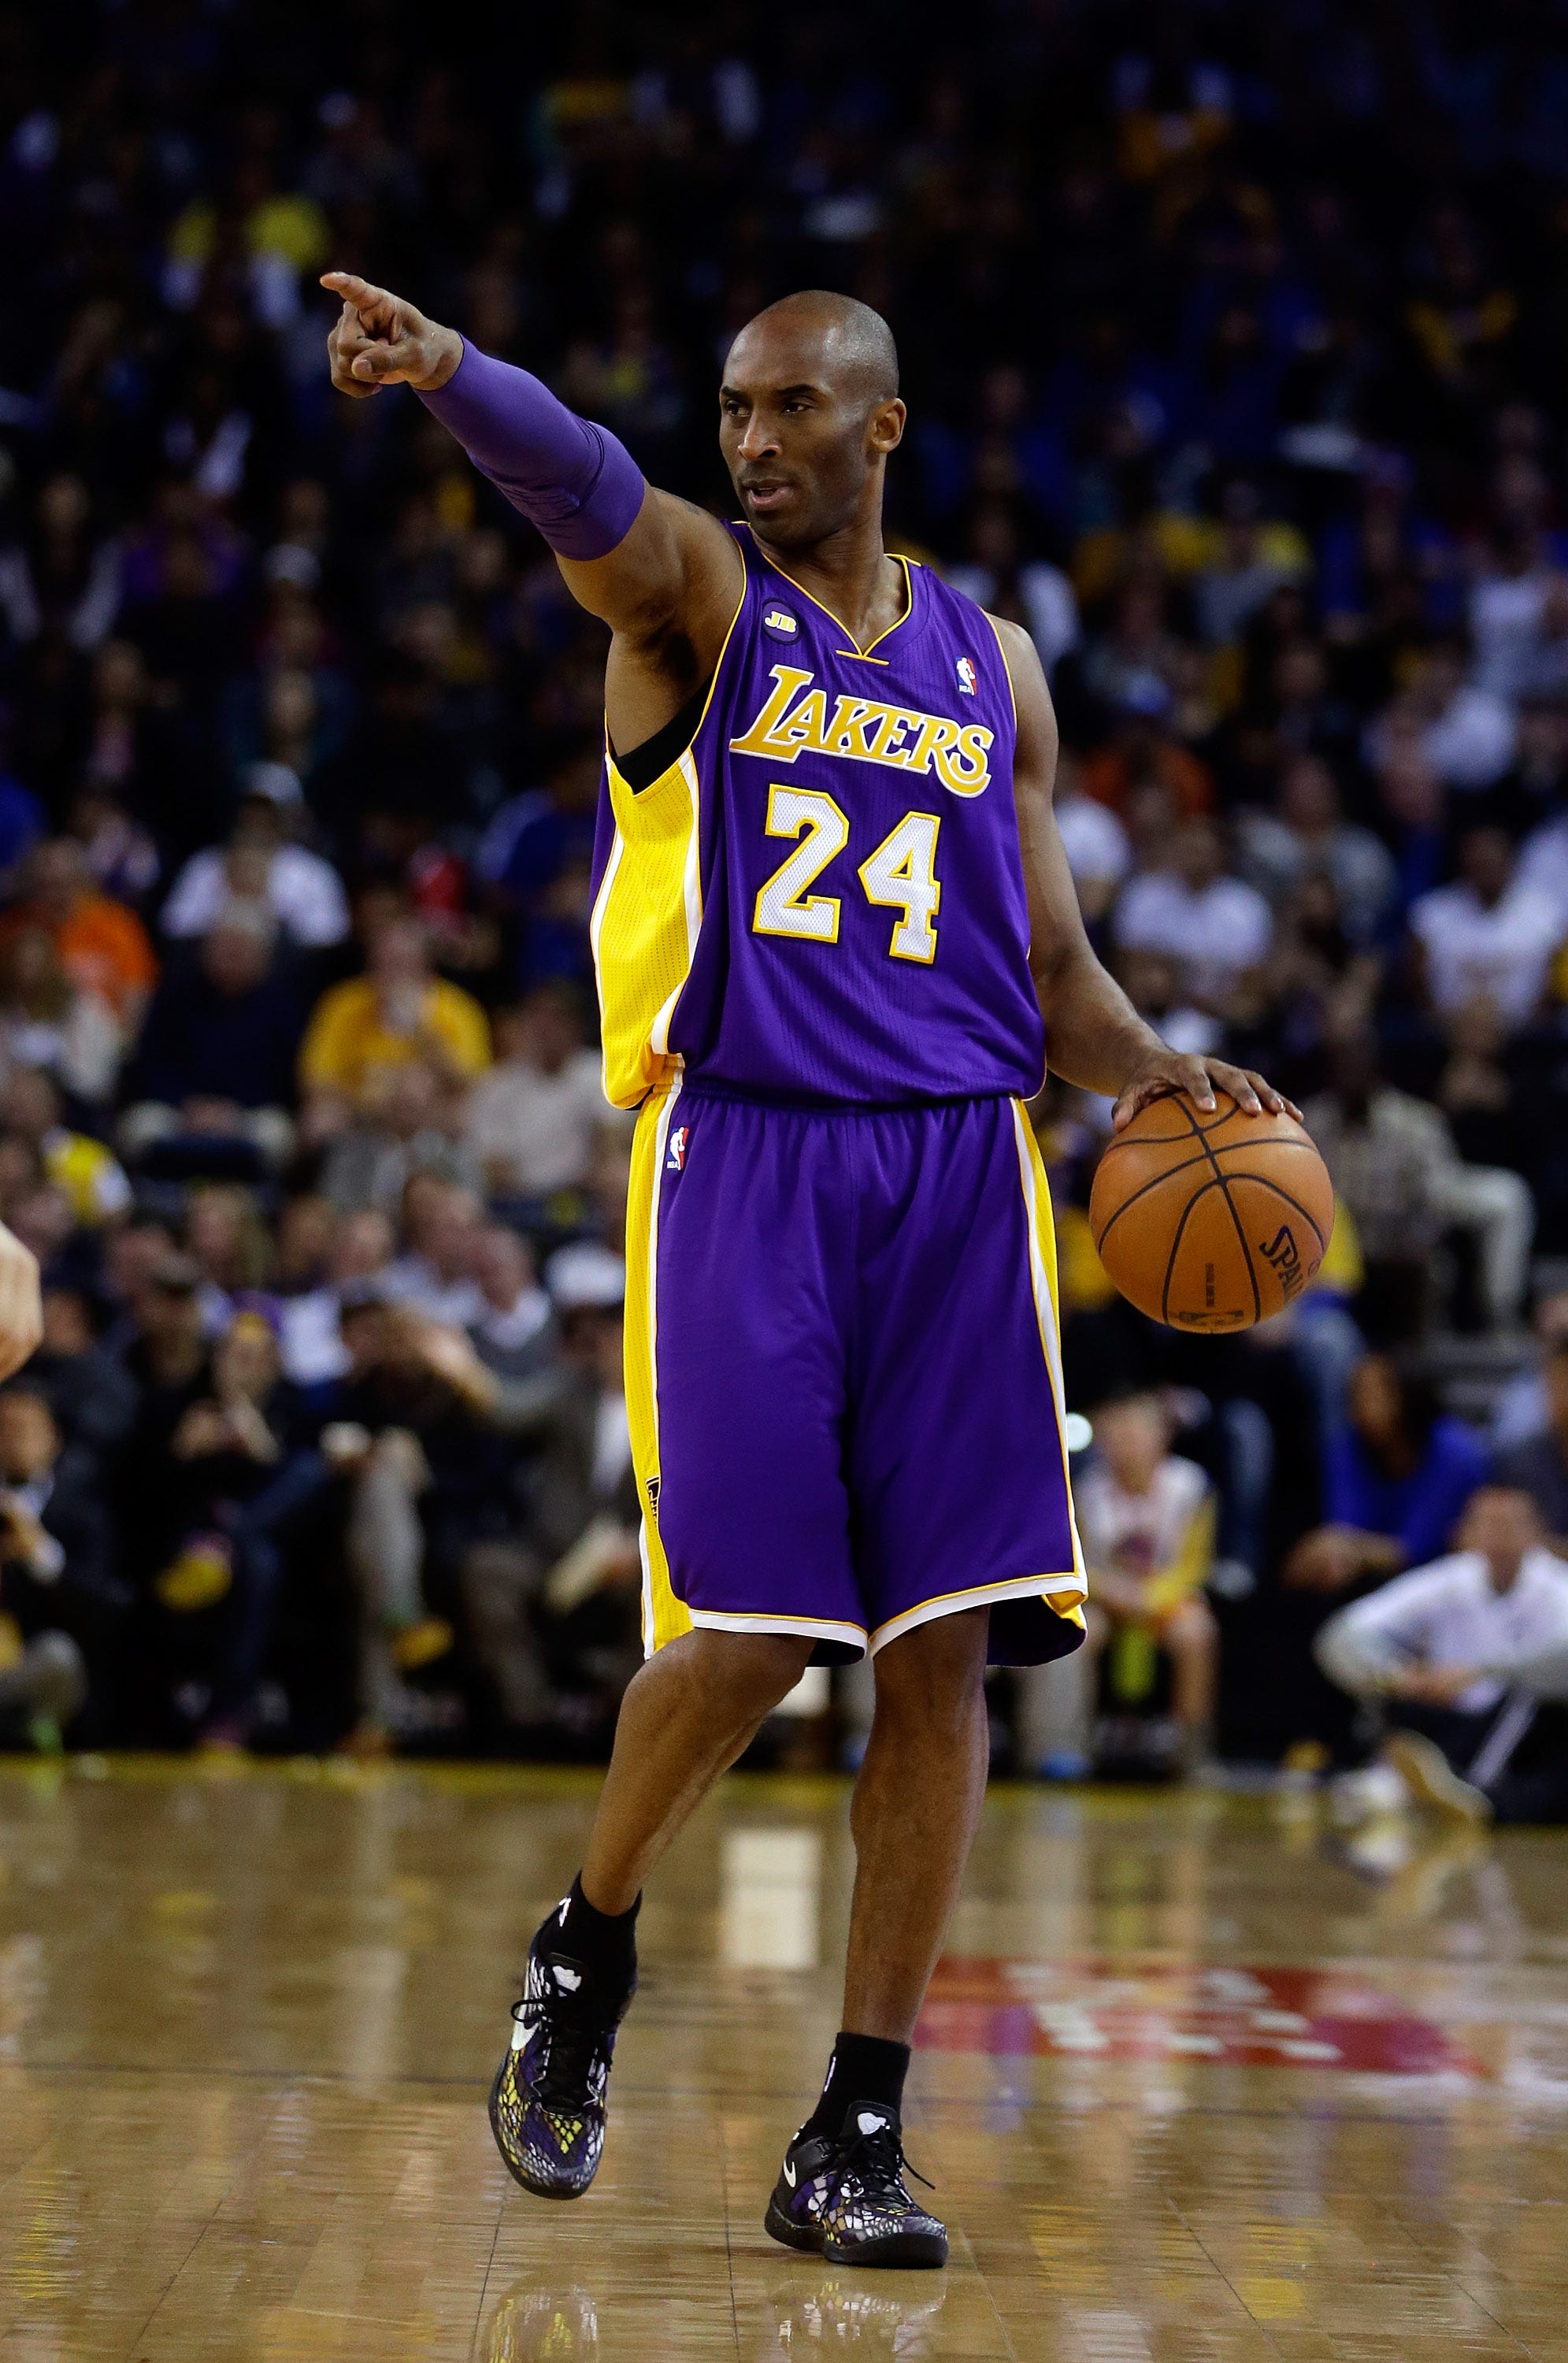 Kobe Bryant points downcourt during a game in March 2013.